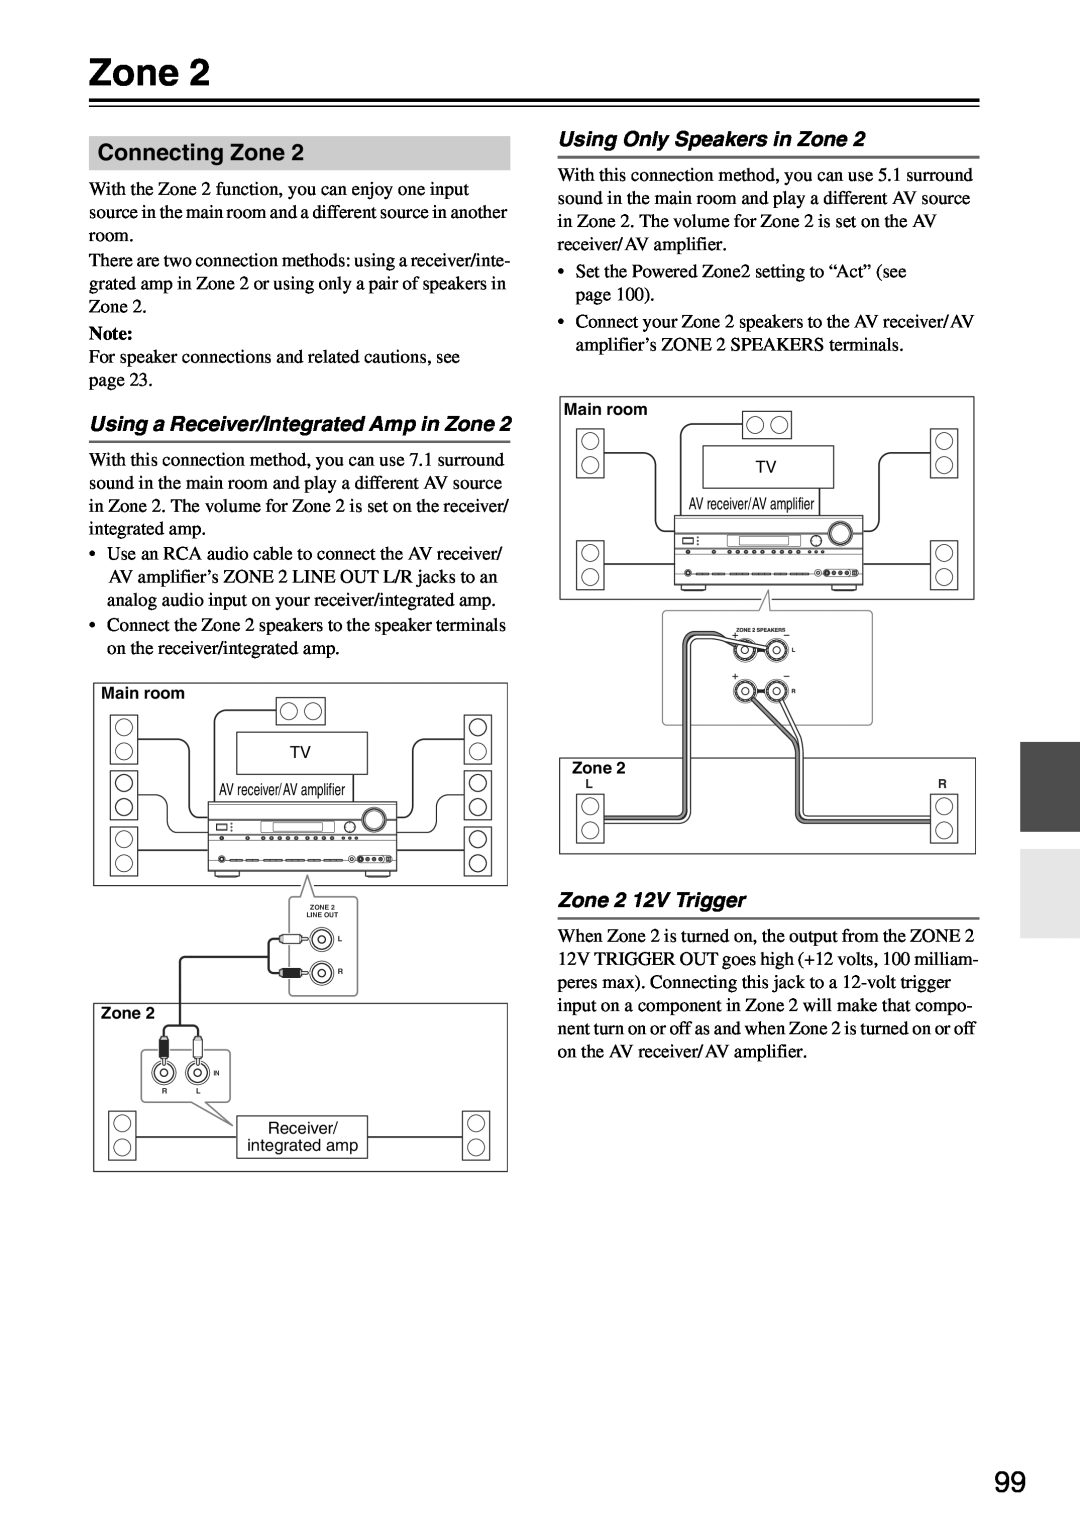 Onkyo TX-SA705 instruction manual Connecting Zone, Using a Receiver/Integrated Amp in Zone, Using Only Speakers in Zone 